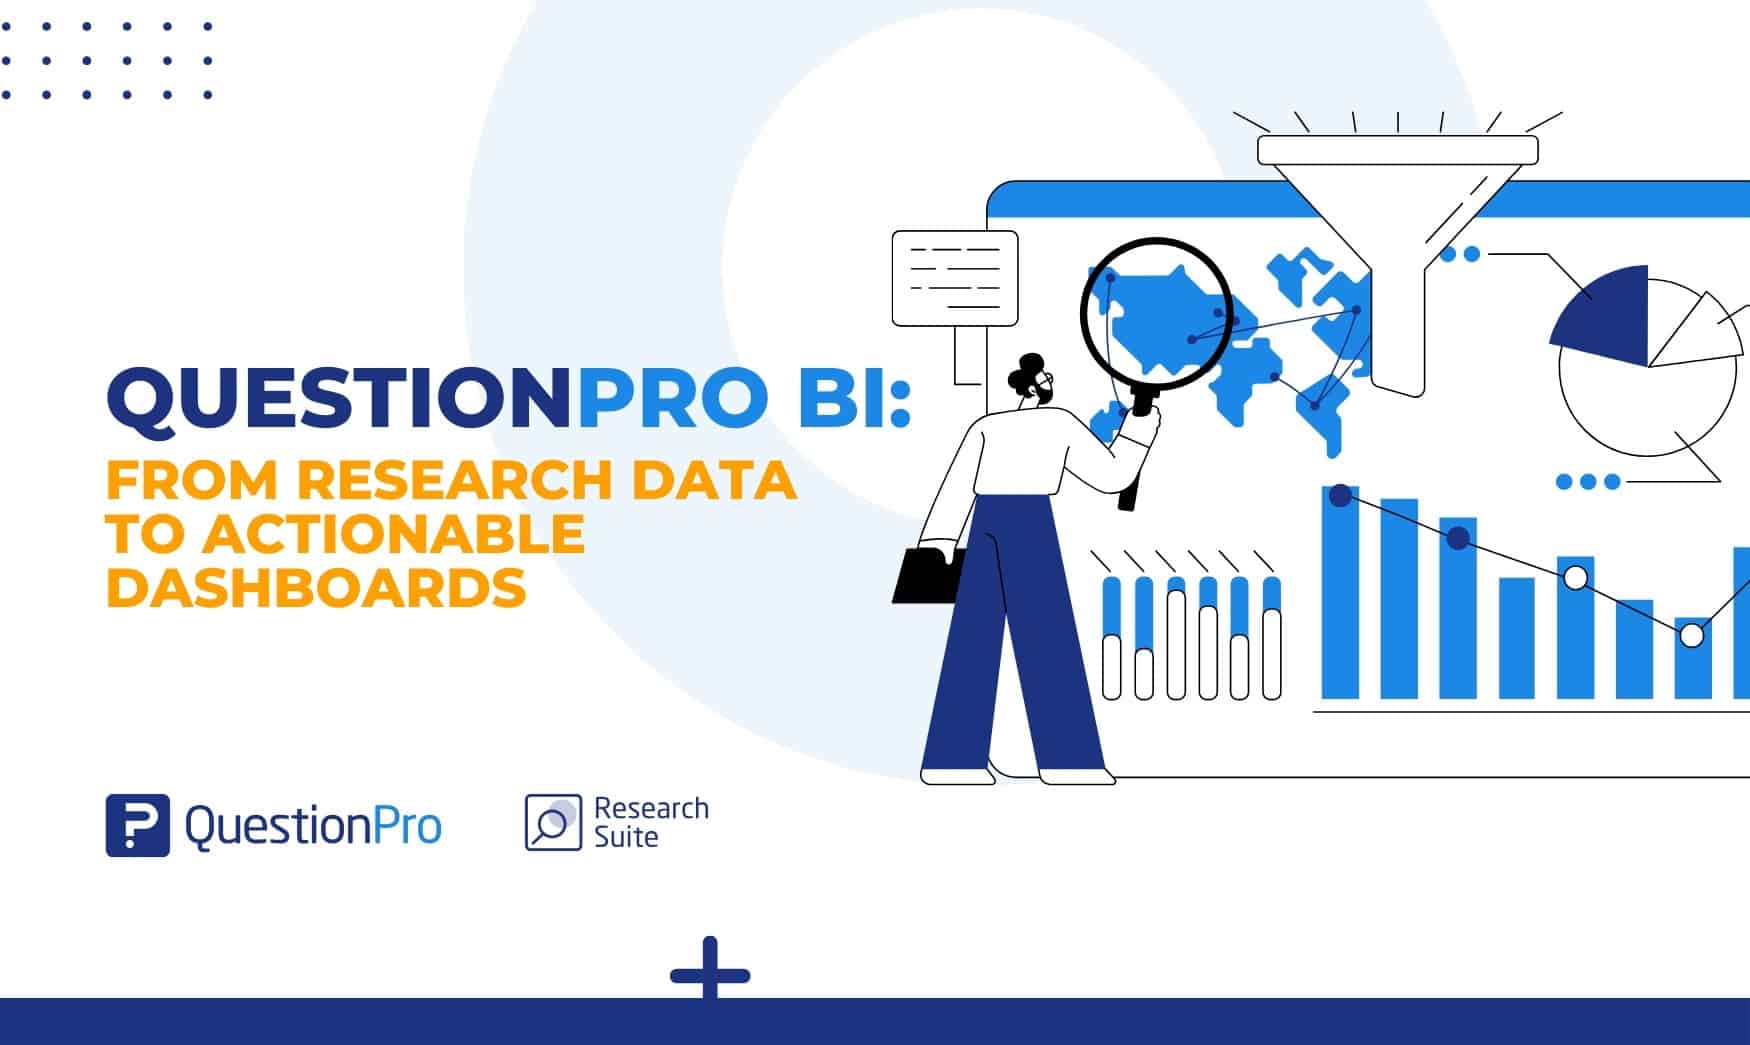 QuestionPro BI: From Research Data to Actionable Dashboards